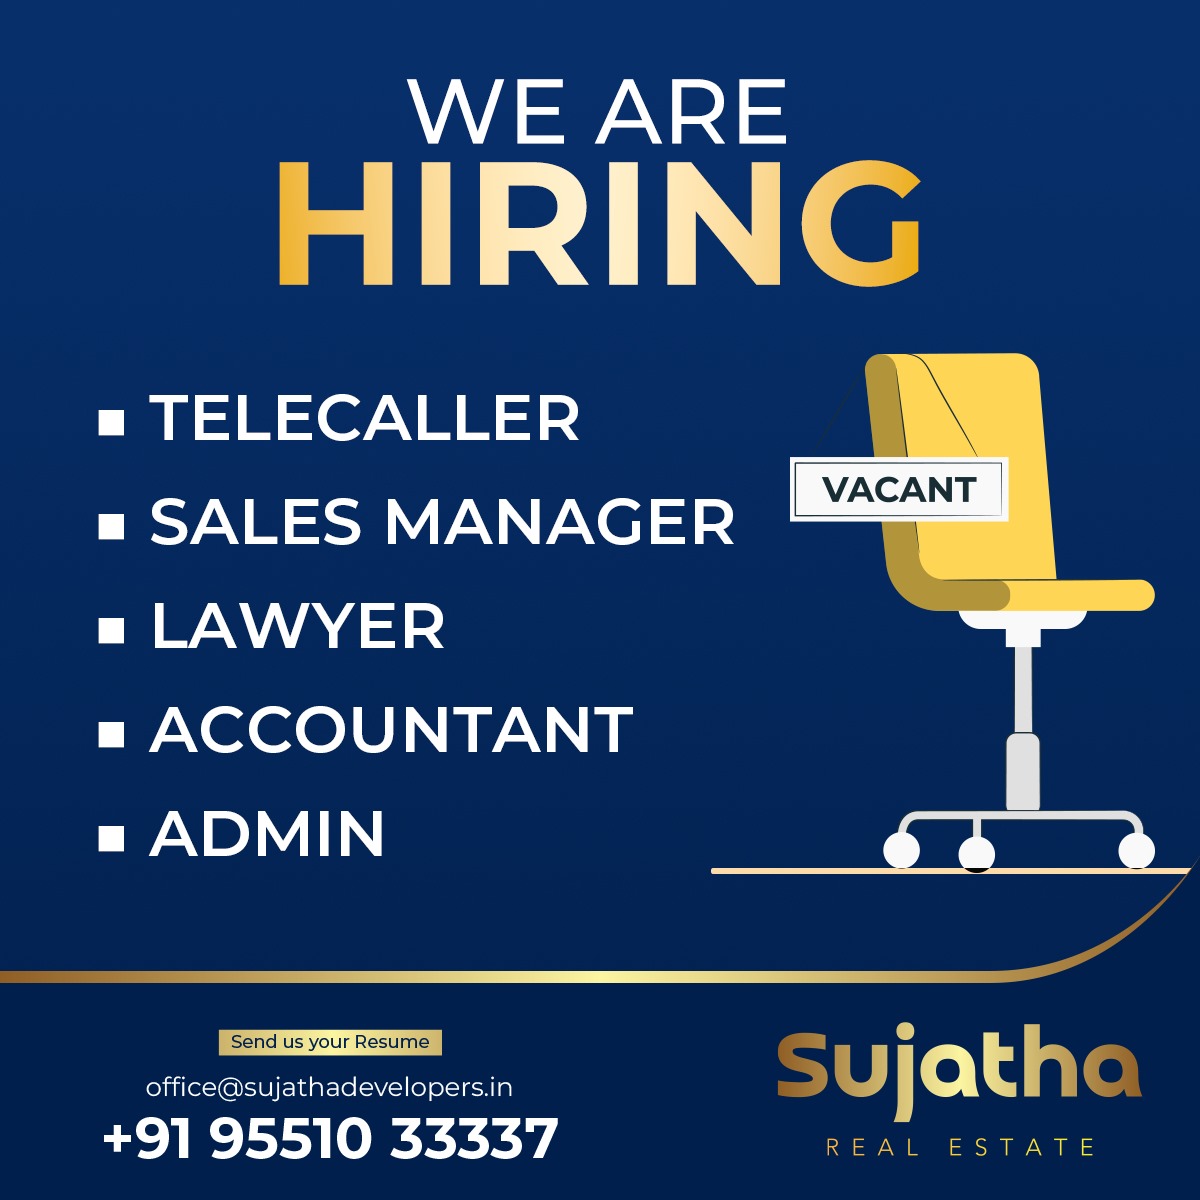 We Are Hiring | Sujatha Realestate

✅ Telecaller 
✅ Sales Manager 
✅ Lawyer 
✅ Accountant 
✅ Admin

Email: office@sujathadevelopers.in 
Call: +91 95510 33337

#telecaller #salesmanager #manager #lawyear #accountant #admin #job #jobhiring #jobsearch #vacant #kumbakonam